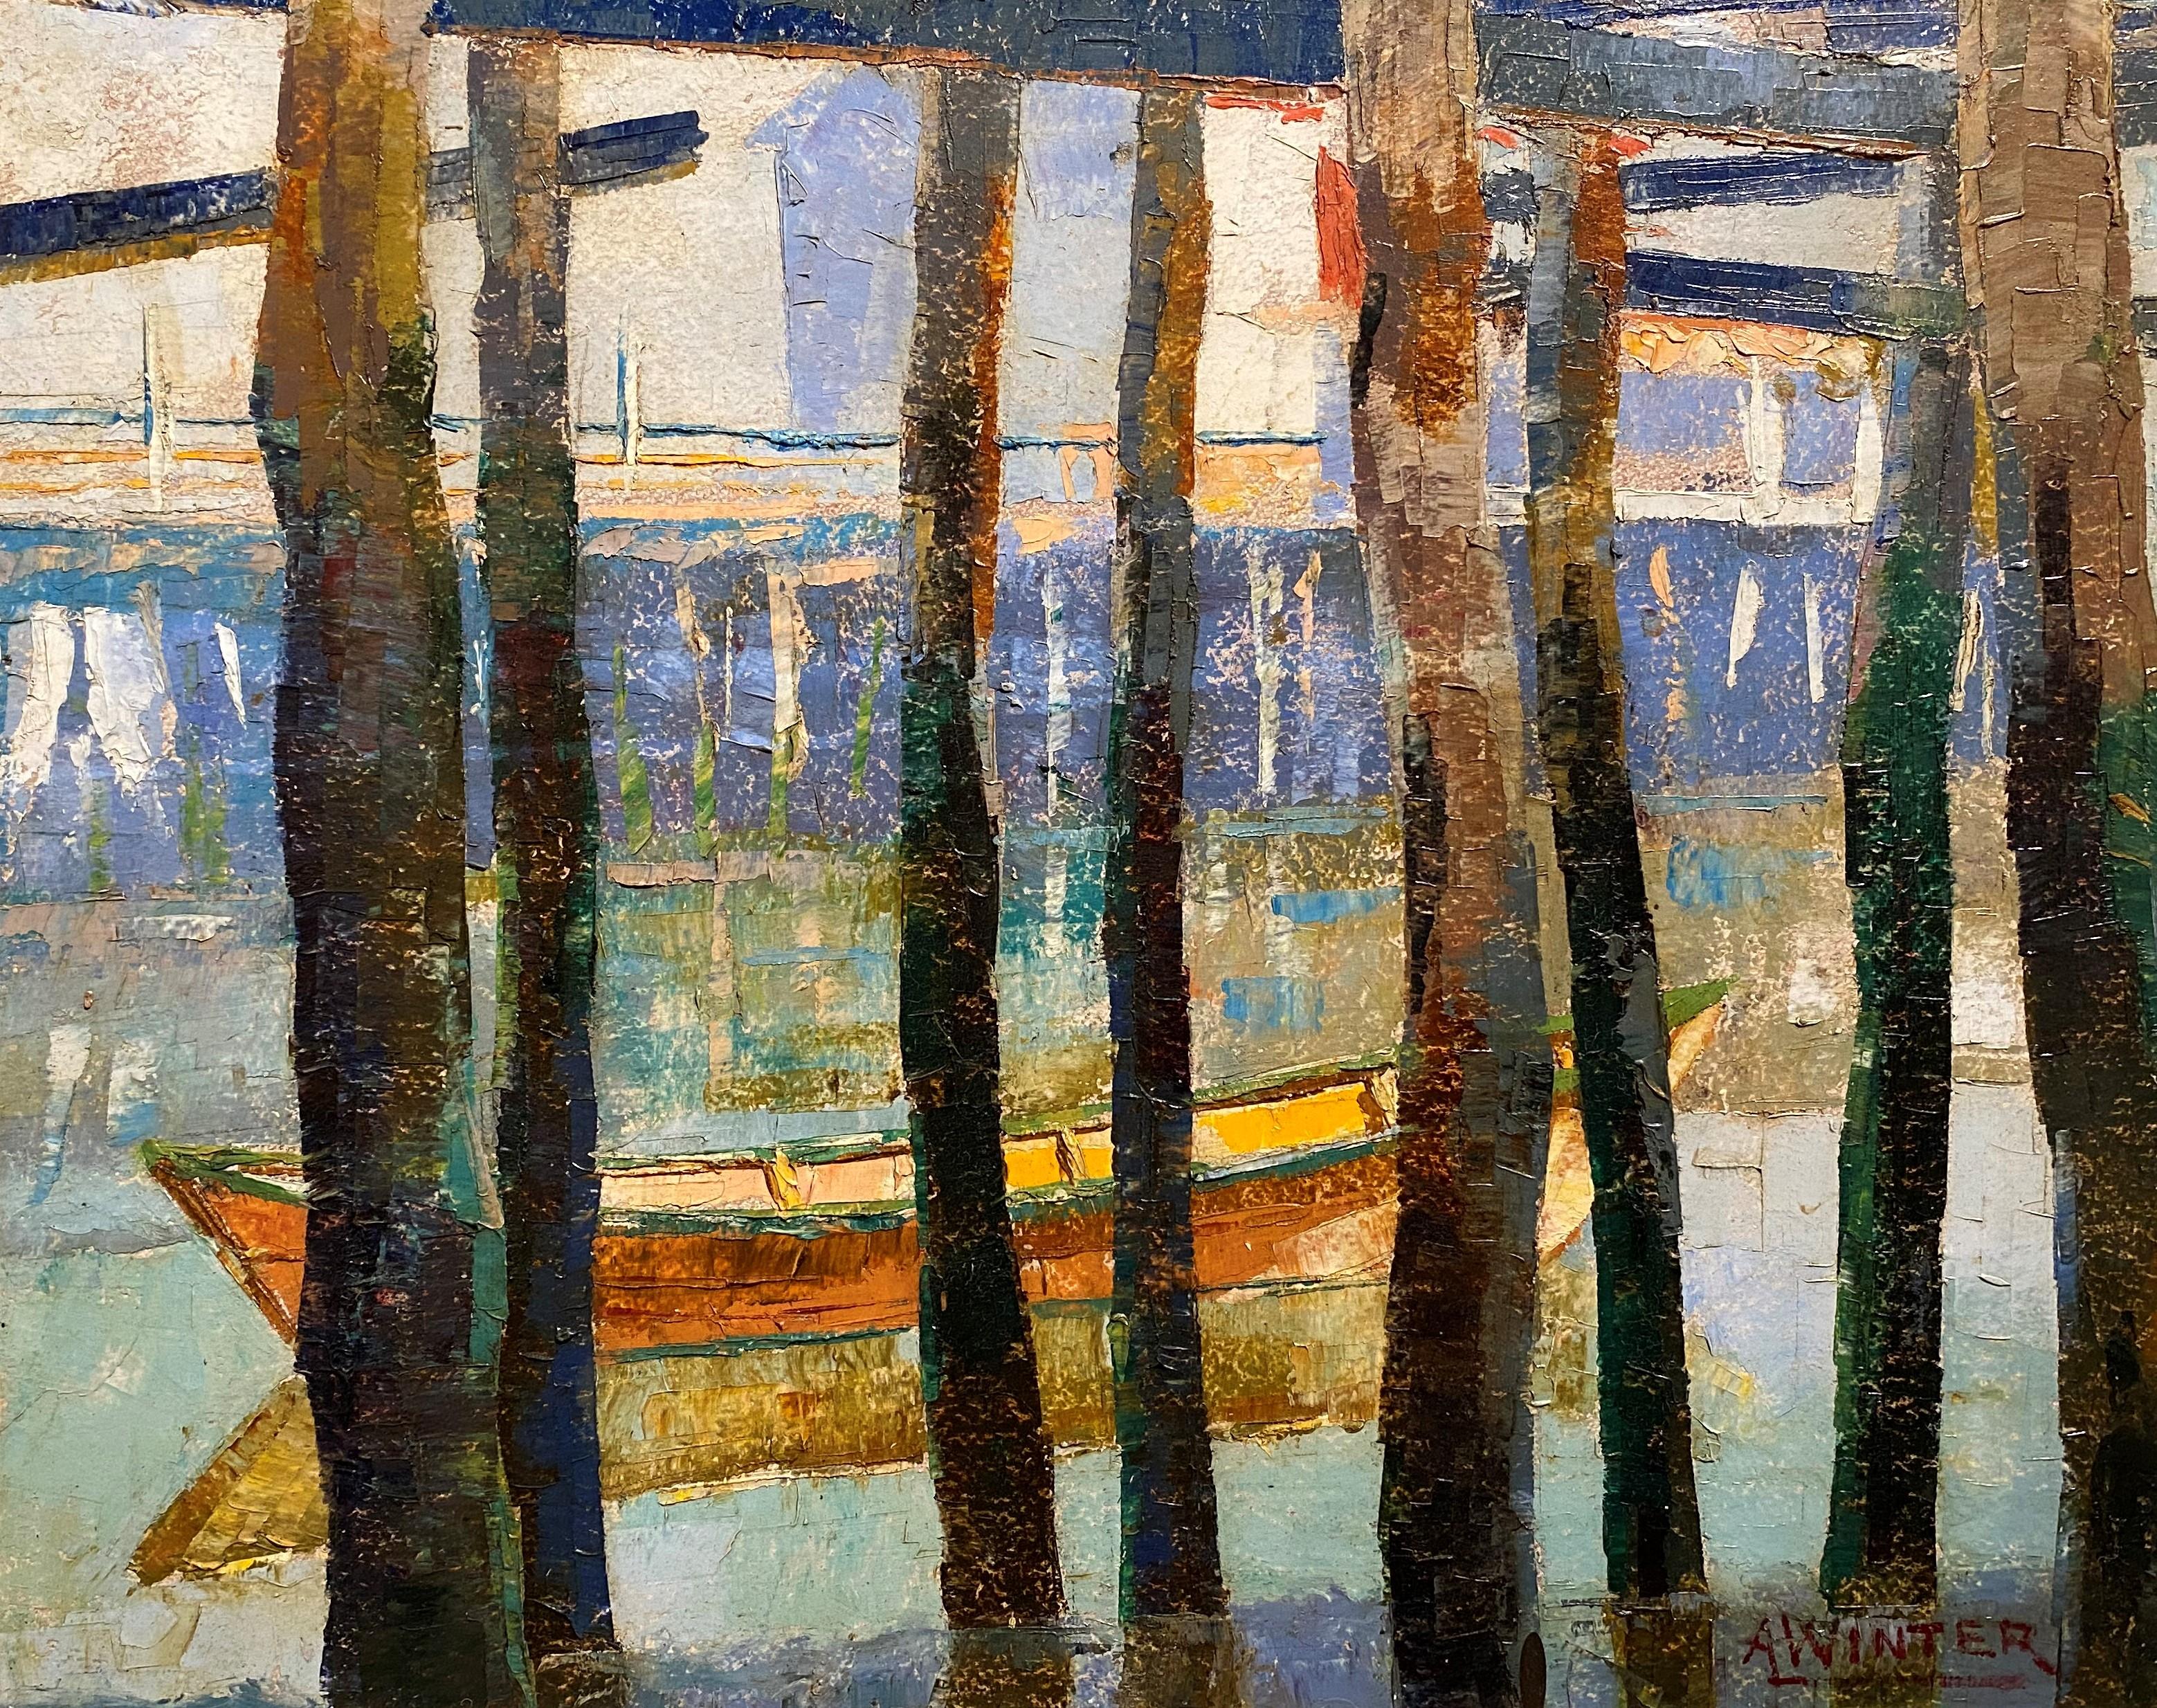 Provincetown Docks - Painting by Andrew Winter